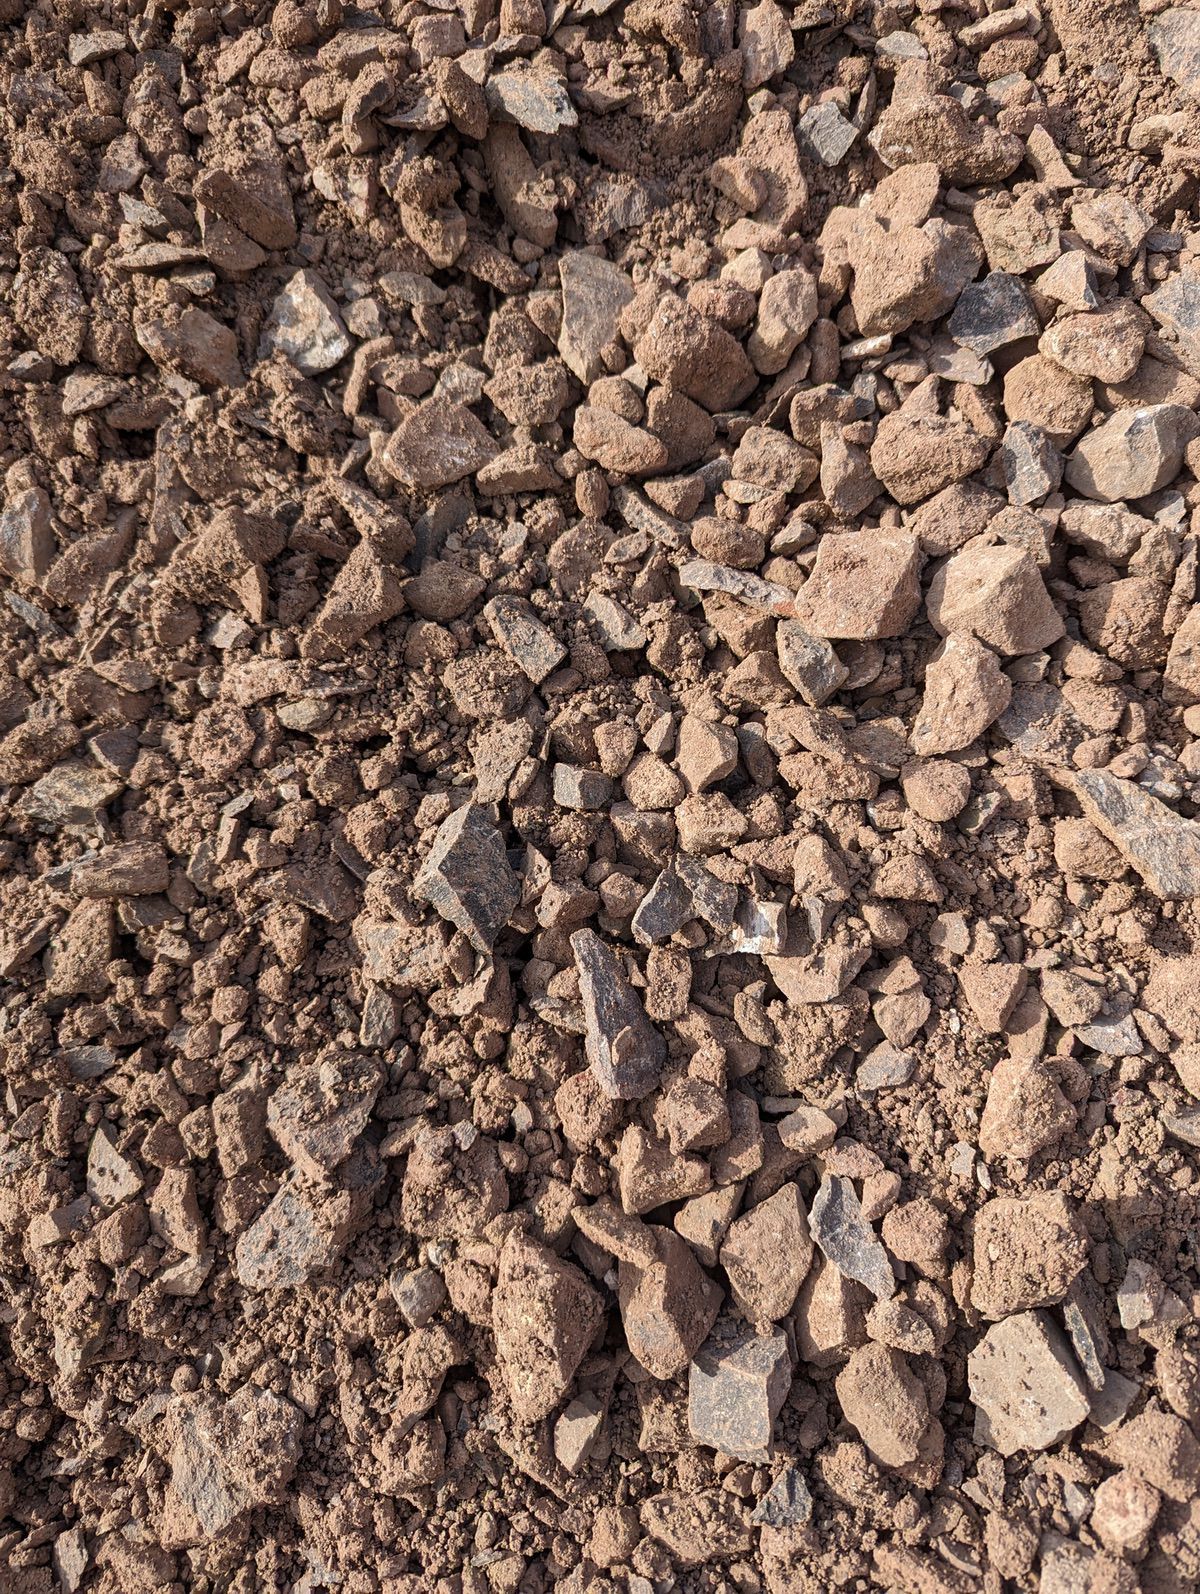 A close up of a pile of rocks and gravel.